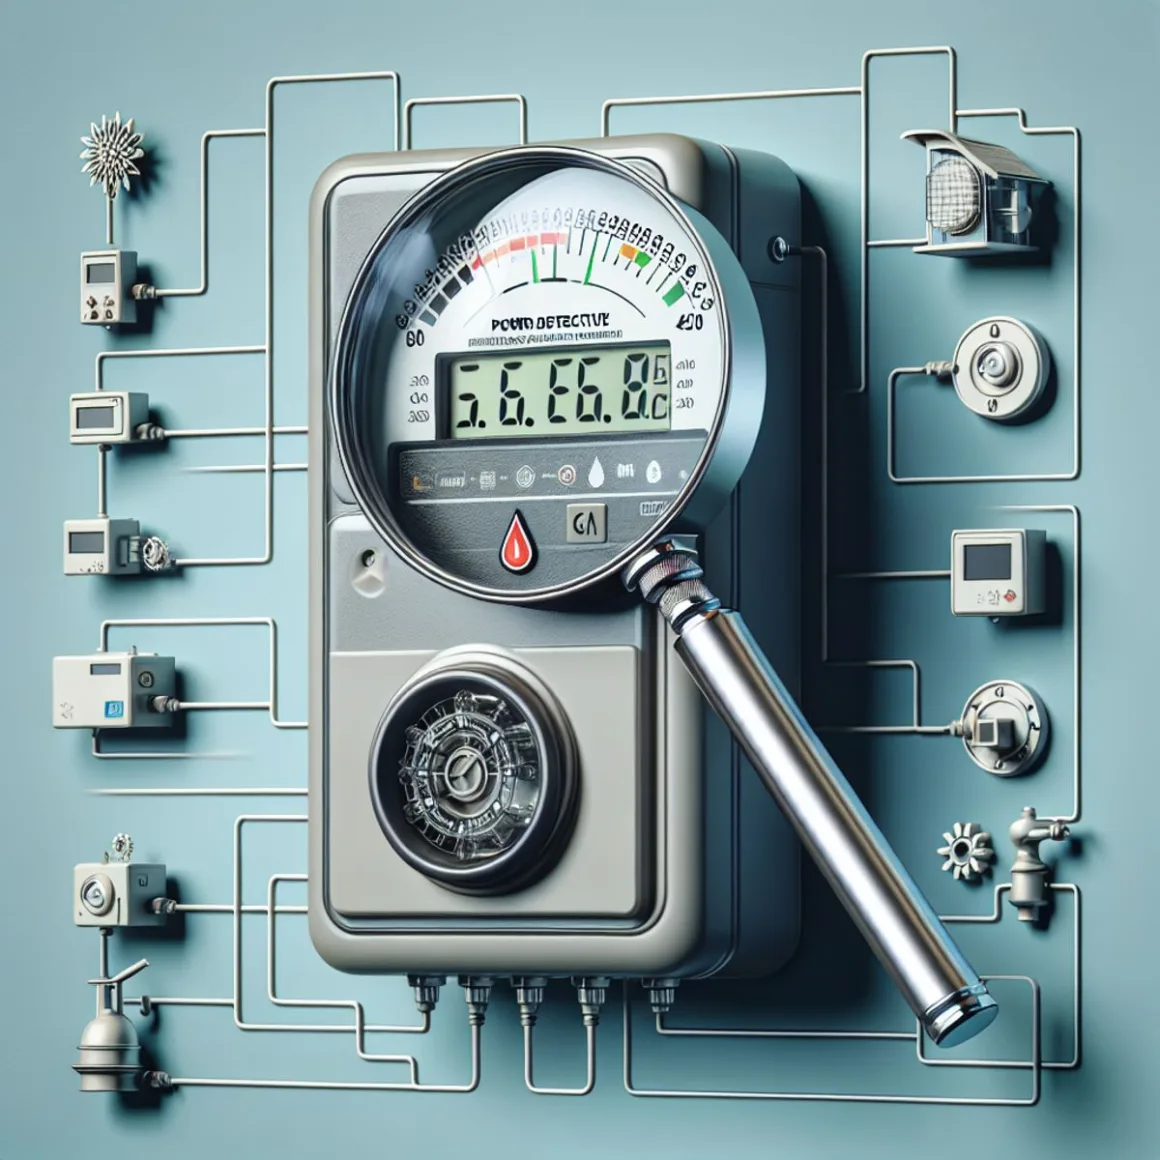 A digital energy meter with a magnifying glass on top, is connected to various appliances through graphical symbols.